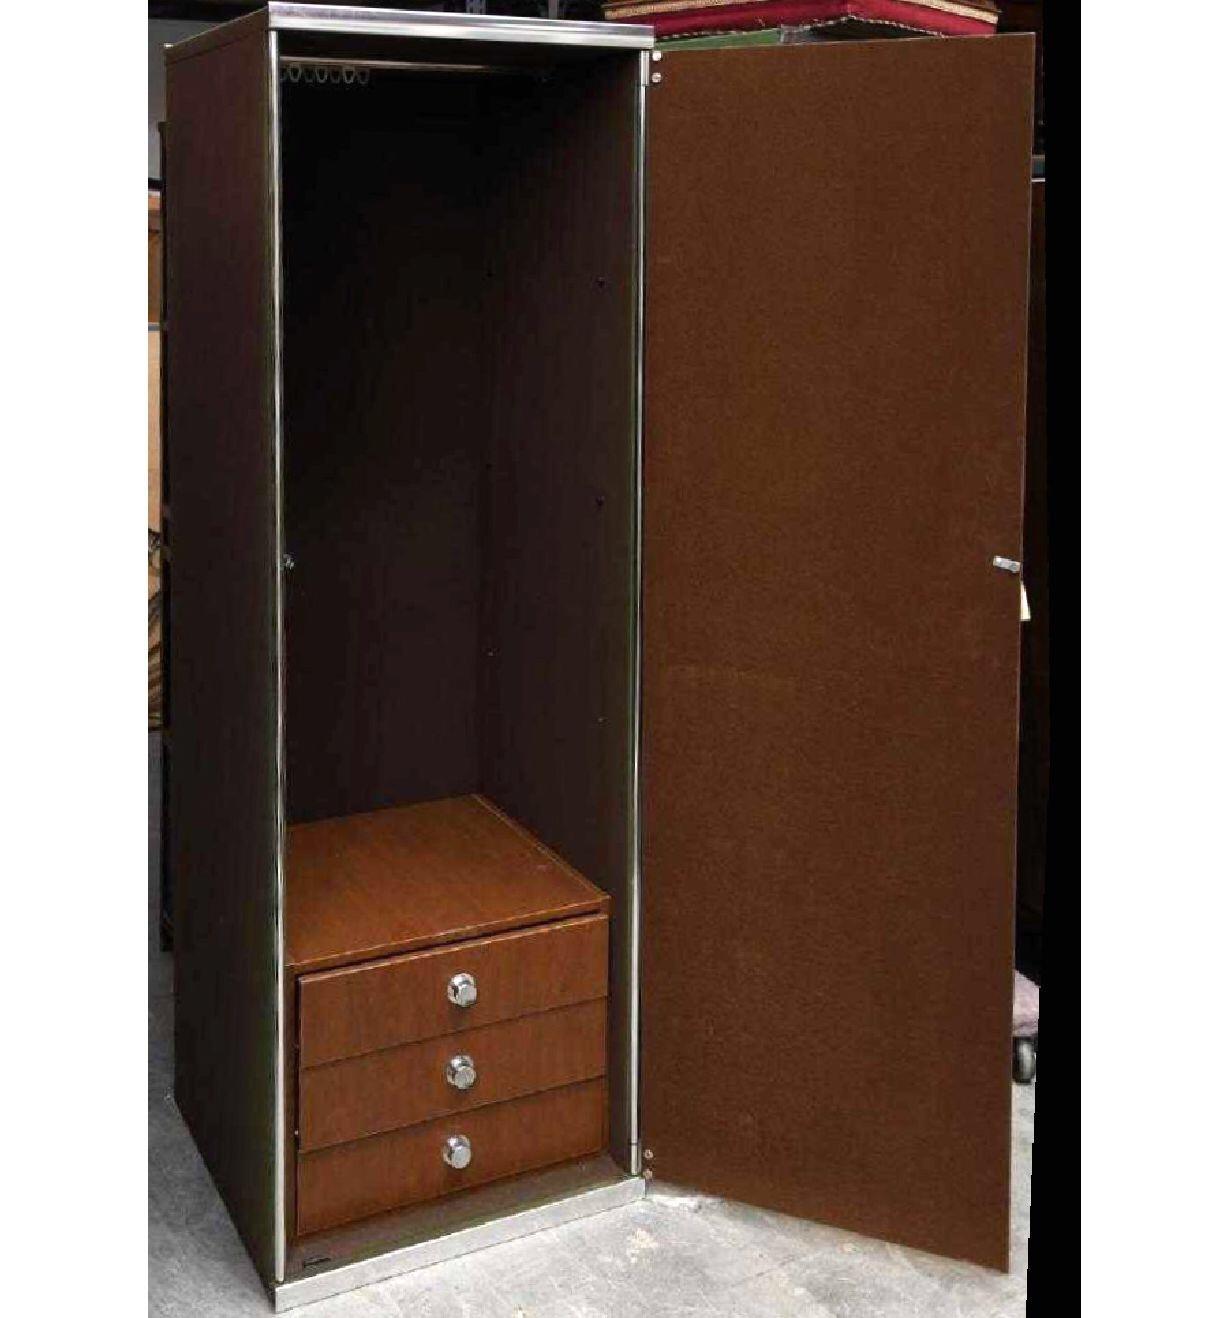 I4 Mariani for Pace mirrored wardrobe cabinet, 20th century, designed by Guido Faleschini, displayed and available for custom order at select Hermès retail locations in the 1970s. Extremely rare, especially with in-tact mirrored front. Gorgeous,